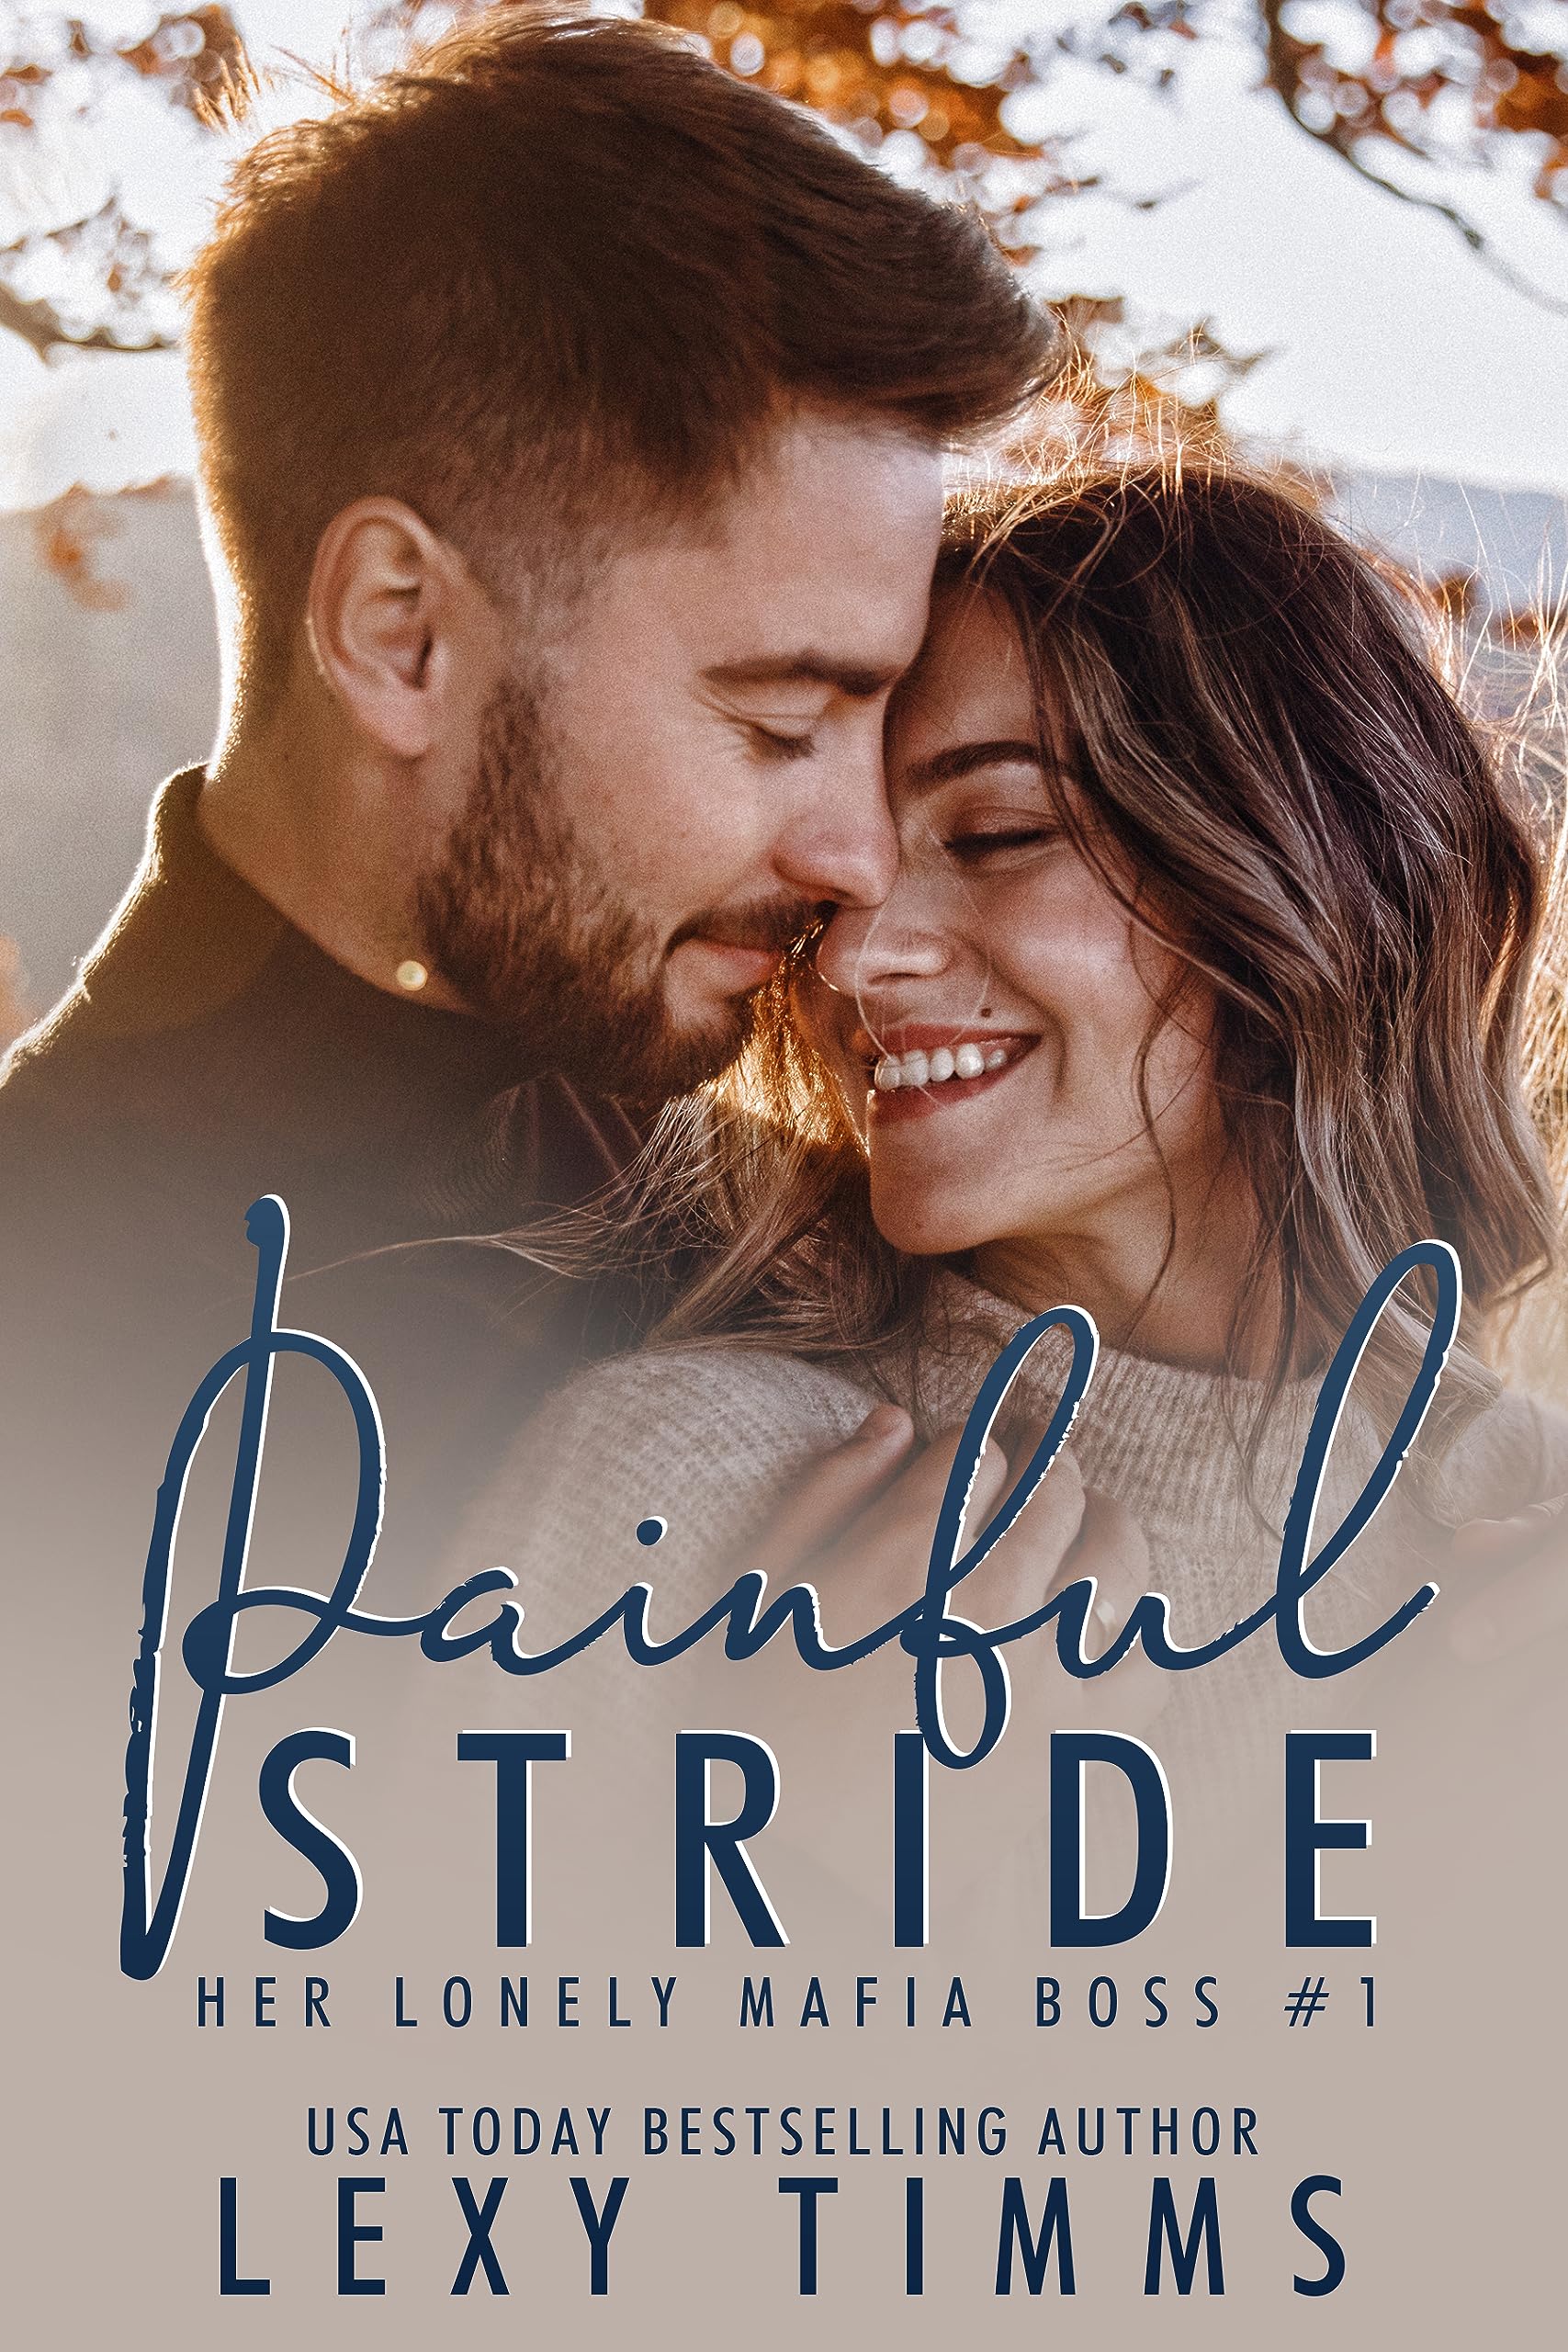 Painful Stride (Her Lonely Mafia Boss Series Book 1)